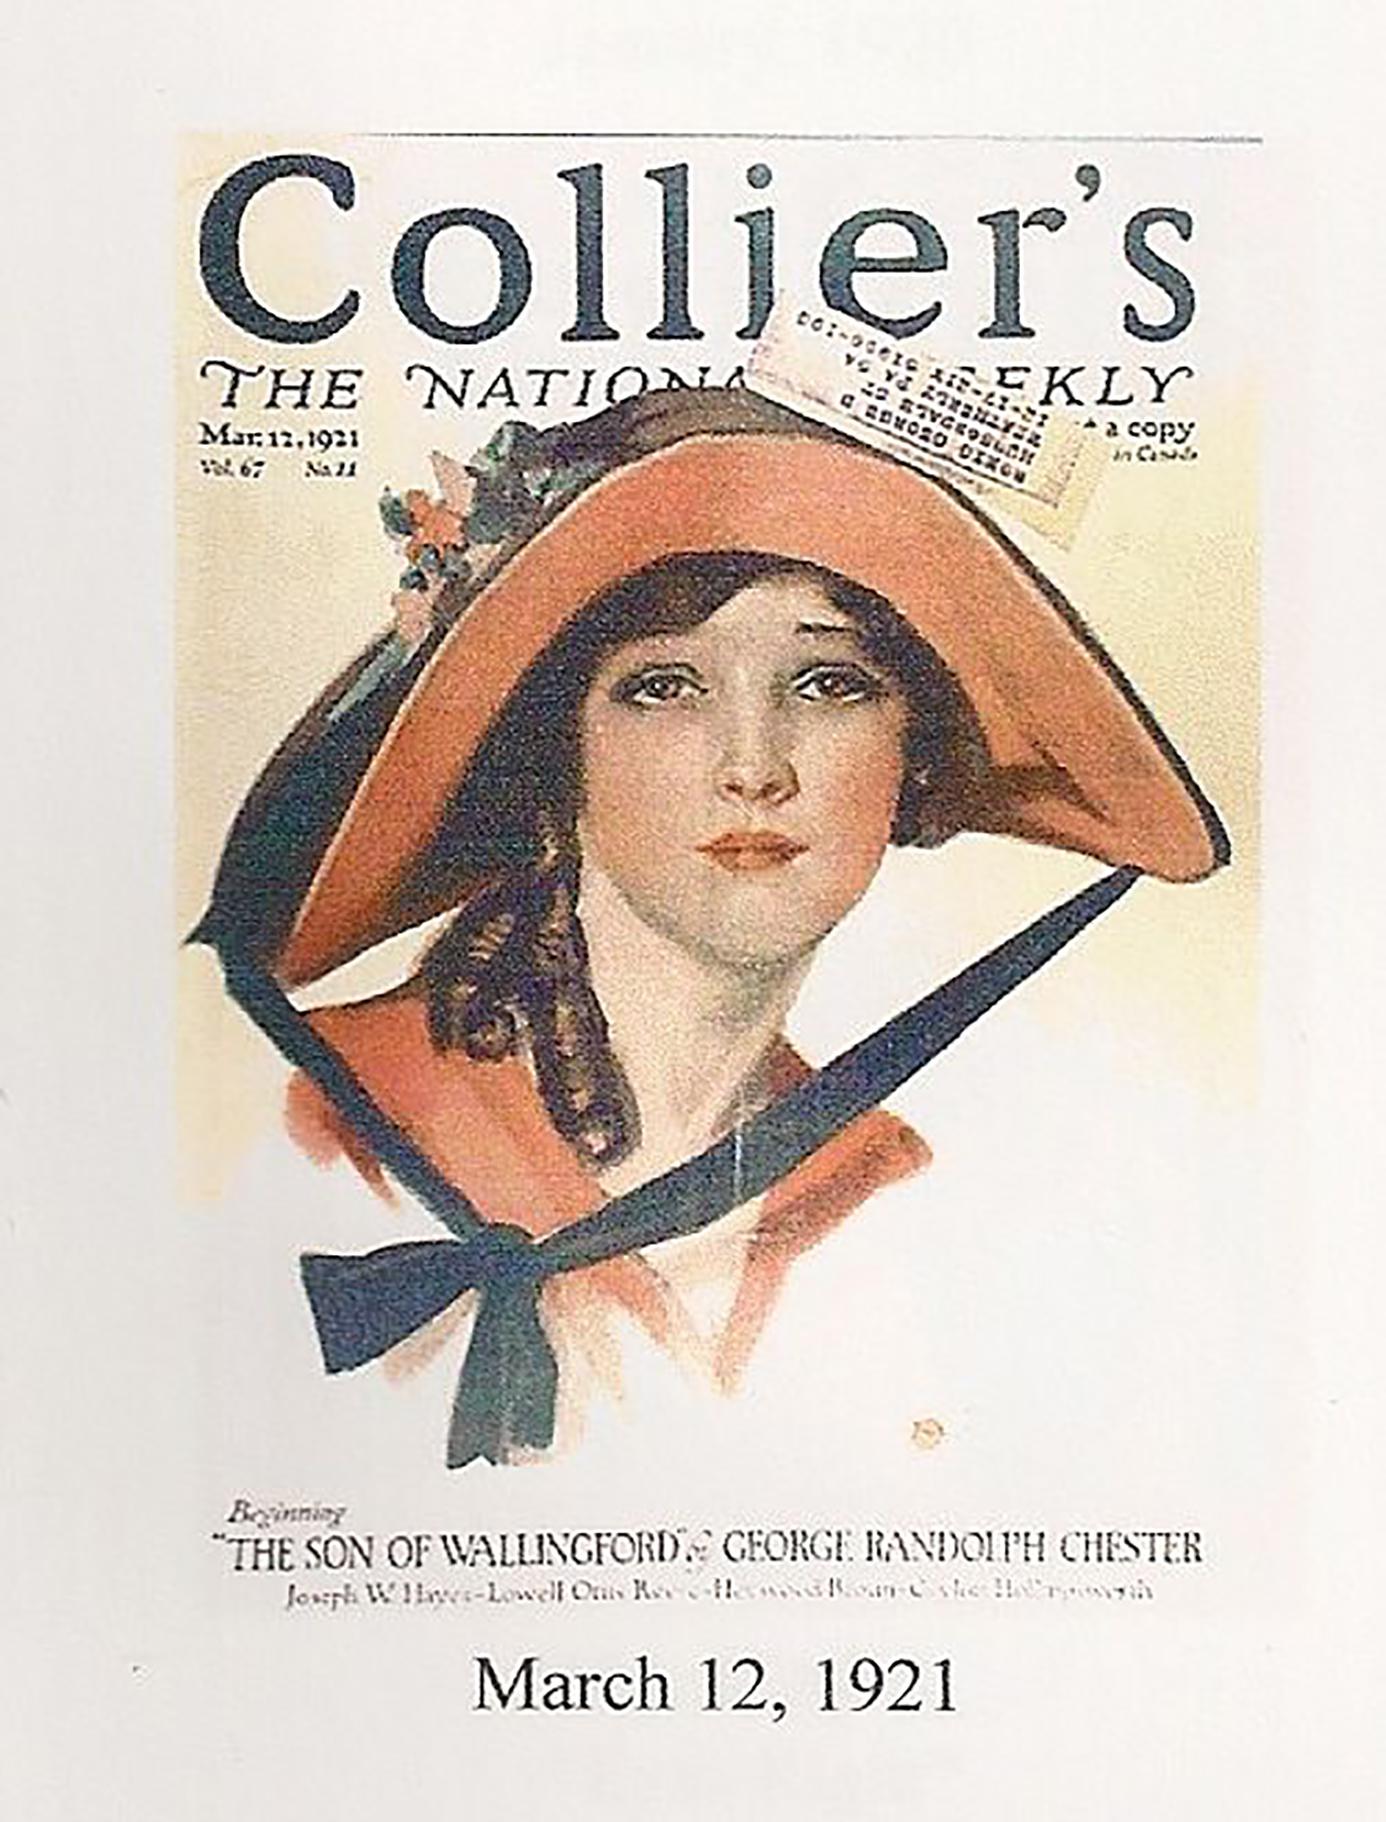 Colliers March 12, 1921 - Art by Penrhyn Stanlaws